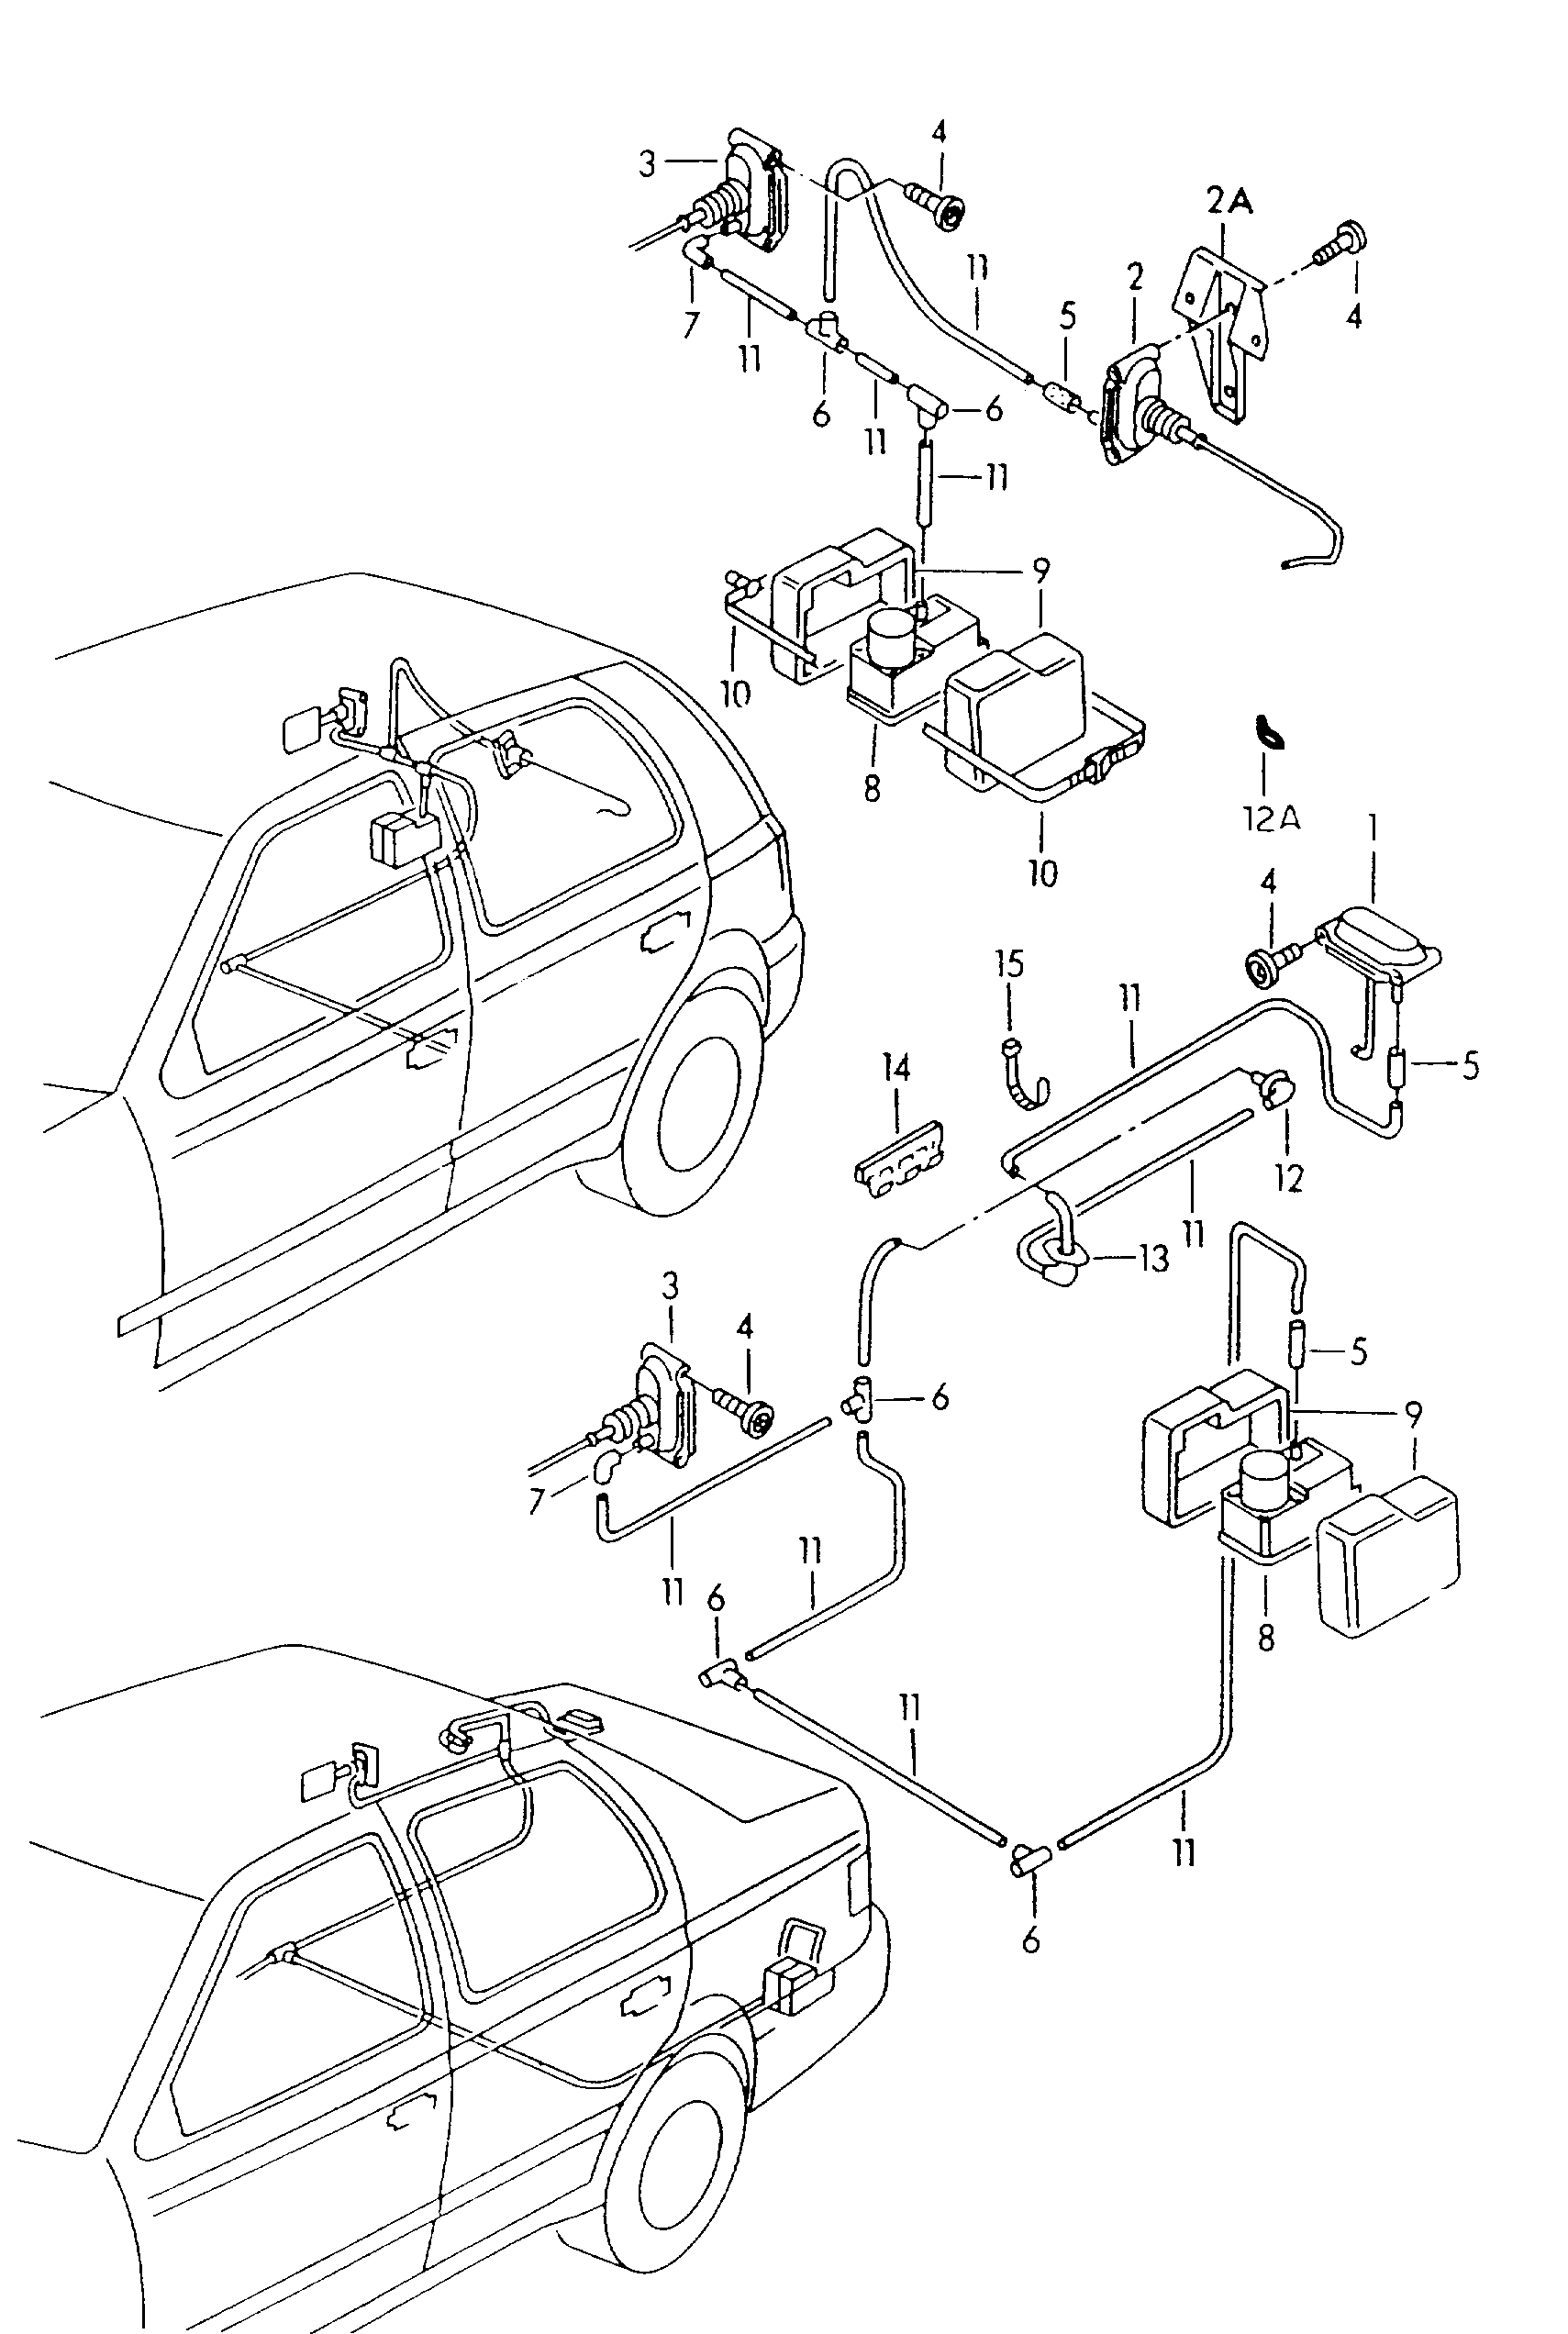 central locking system for<br>tailgate  and fuel filler<br>flap  - Golf - gom